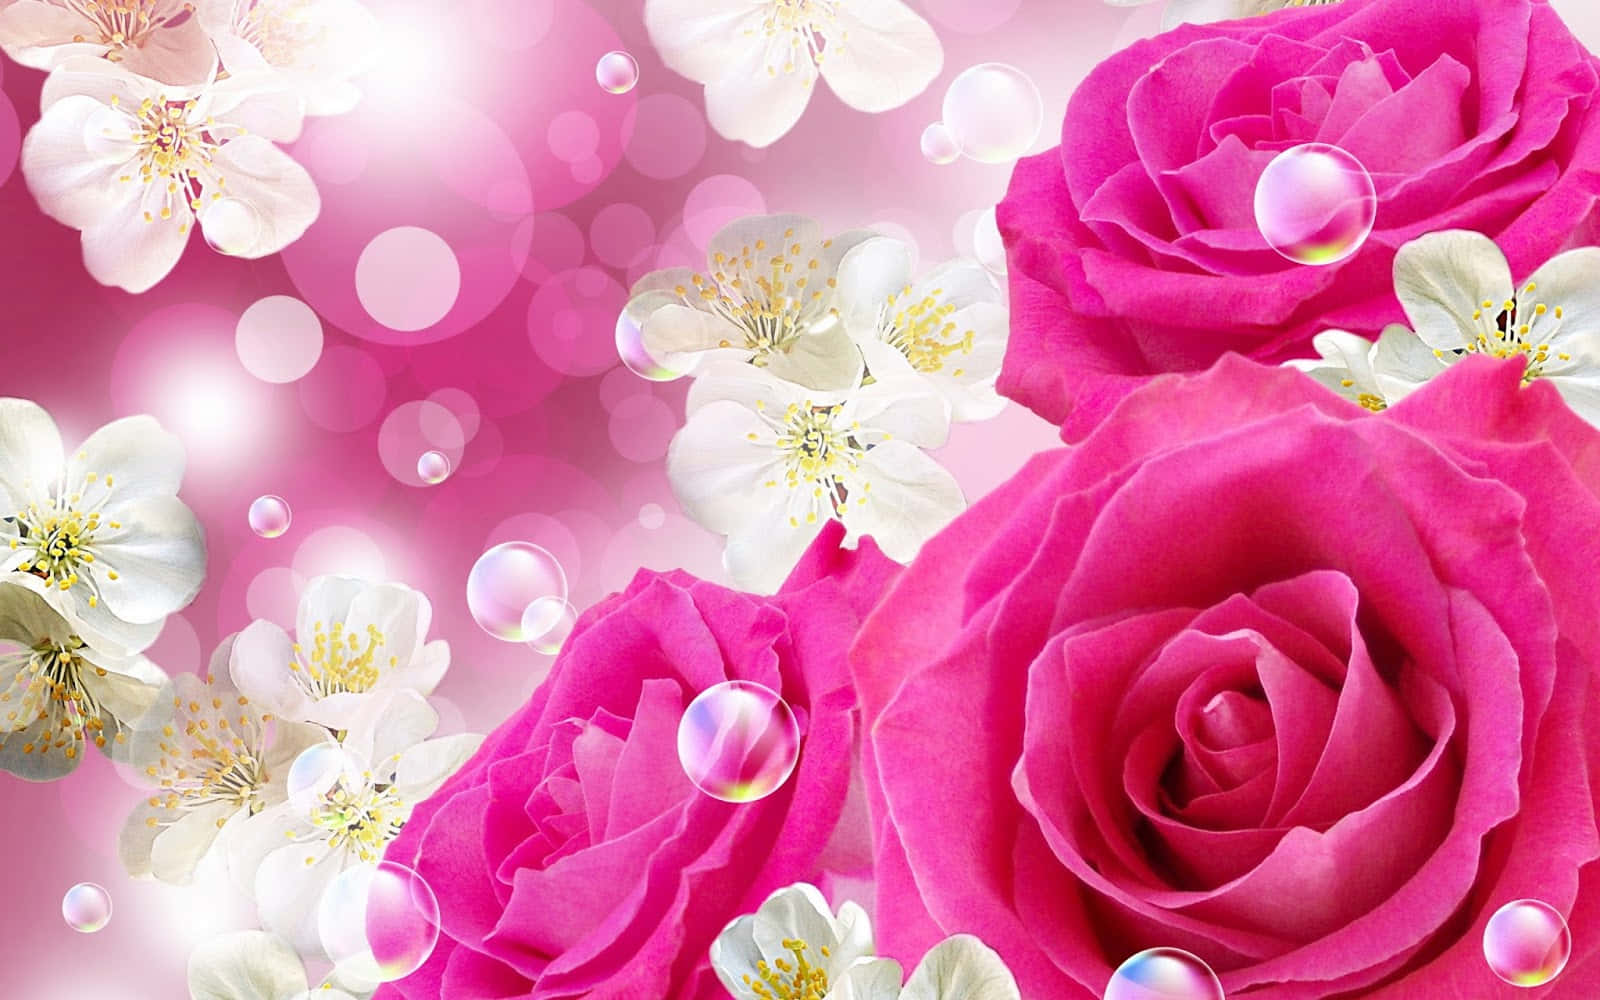 Pink Roses And White Flowers On A Pink Background